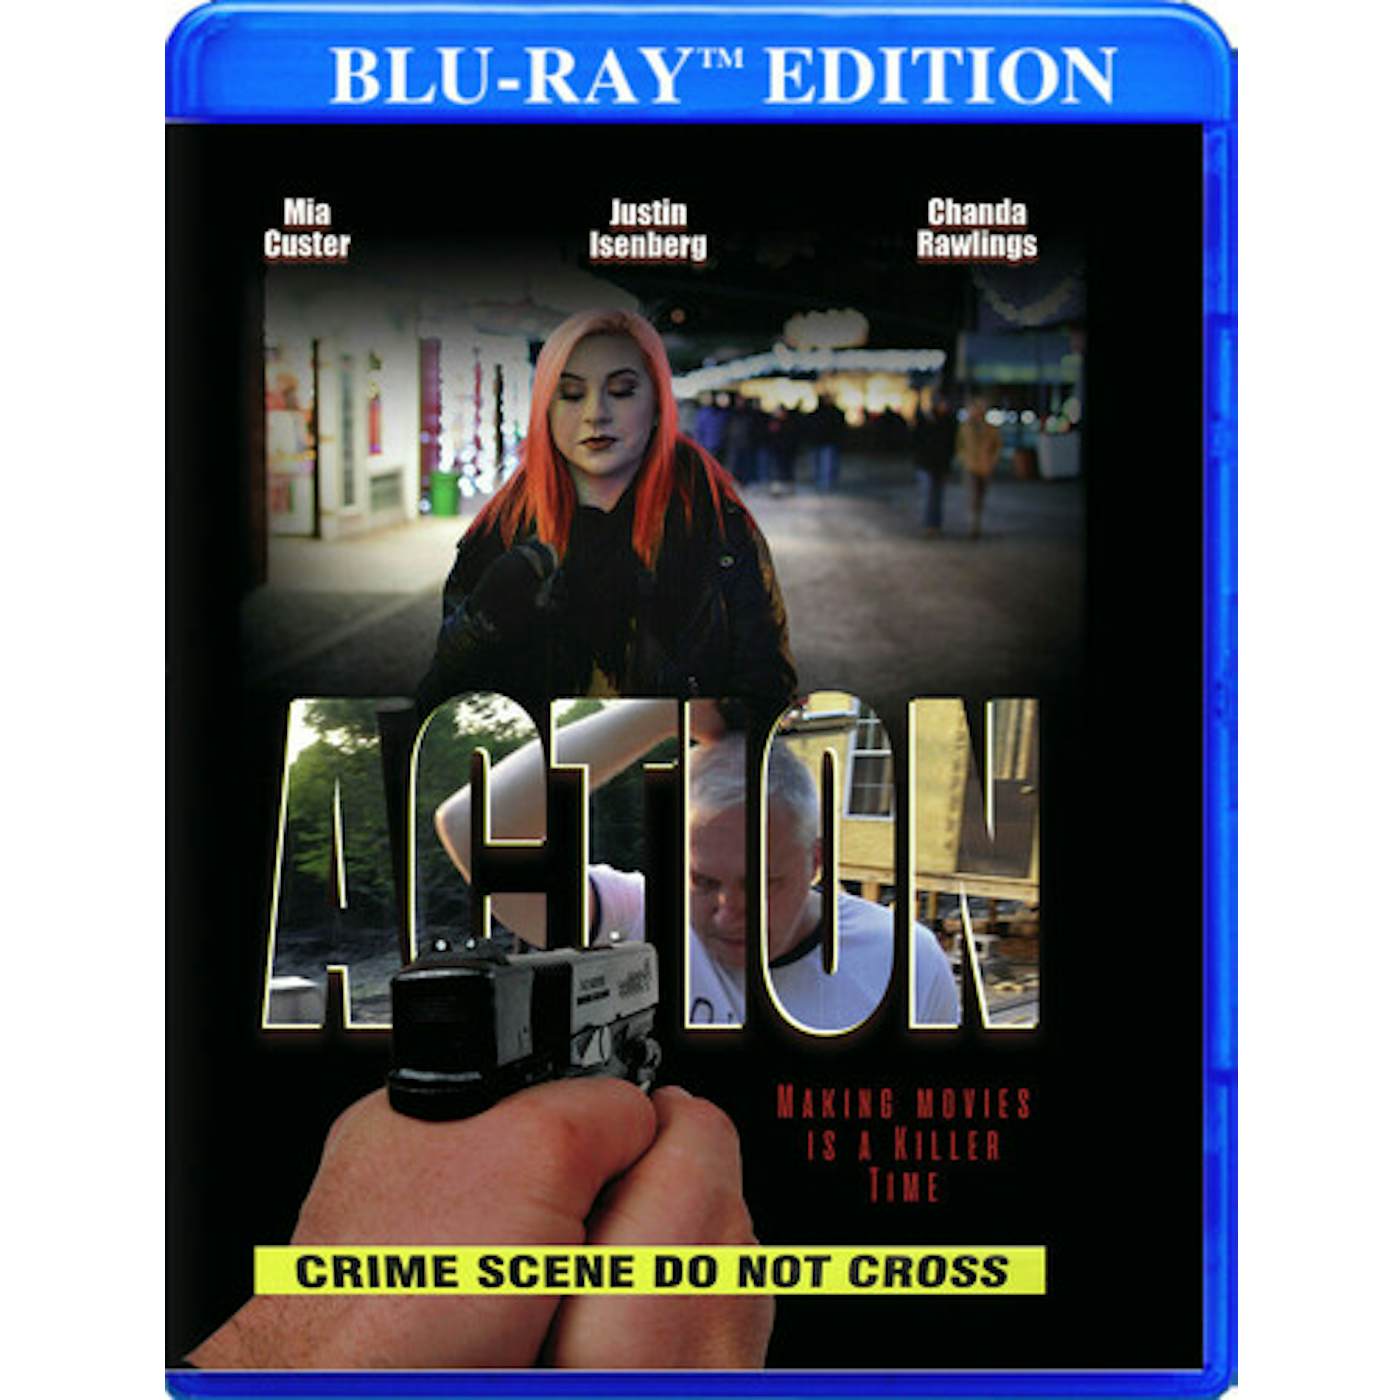 ACTION Blu-ray